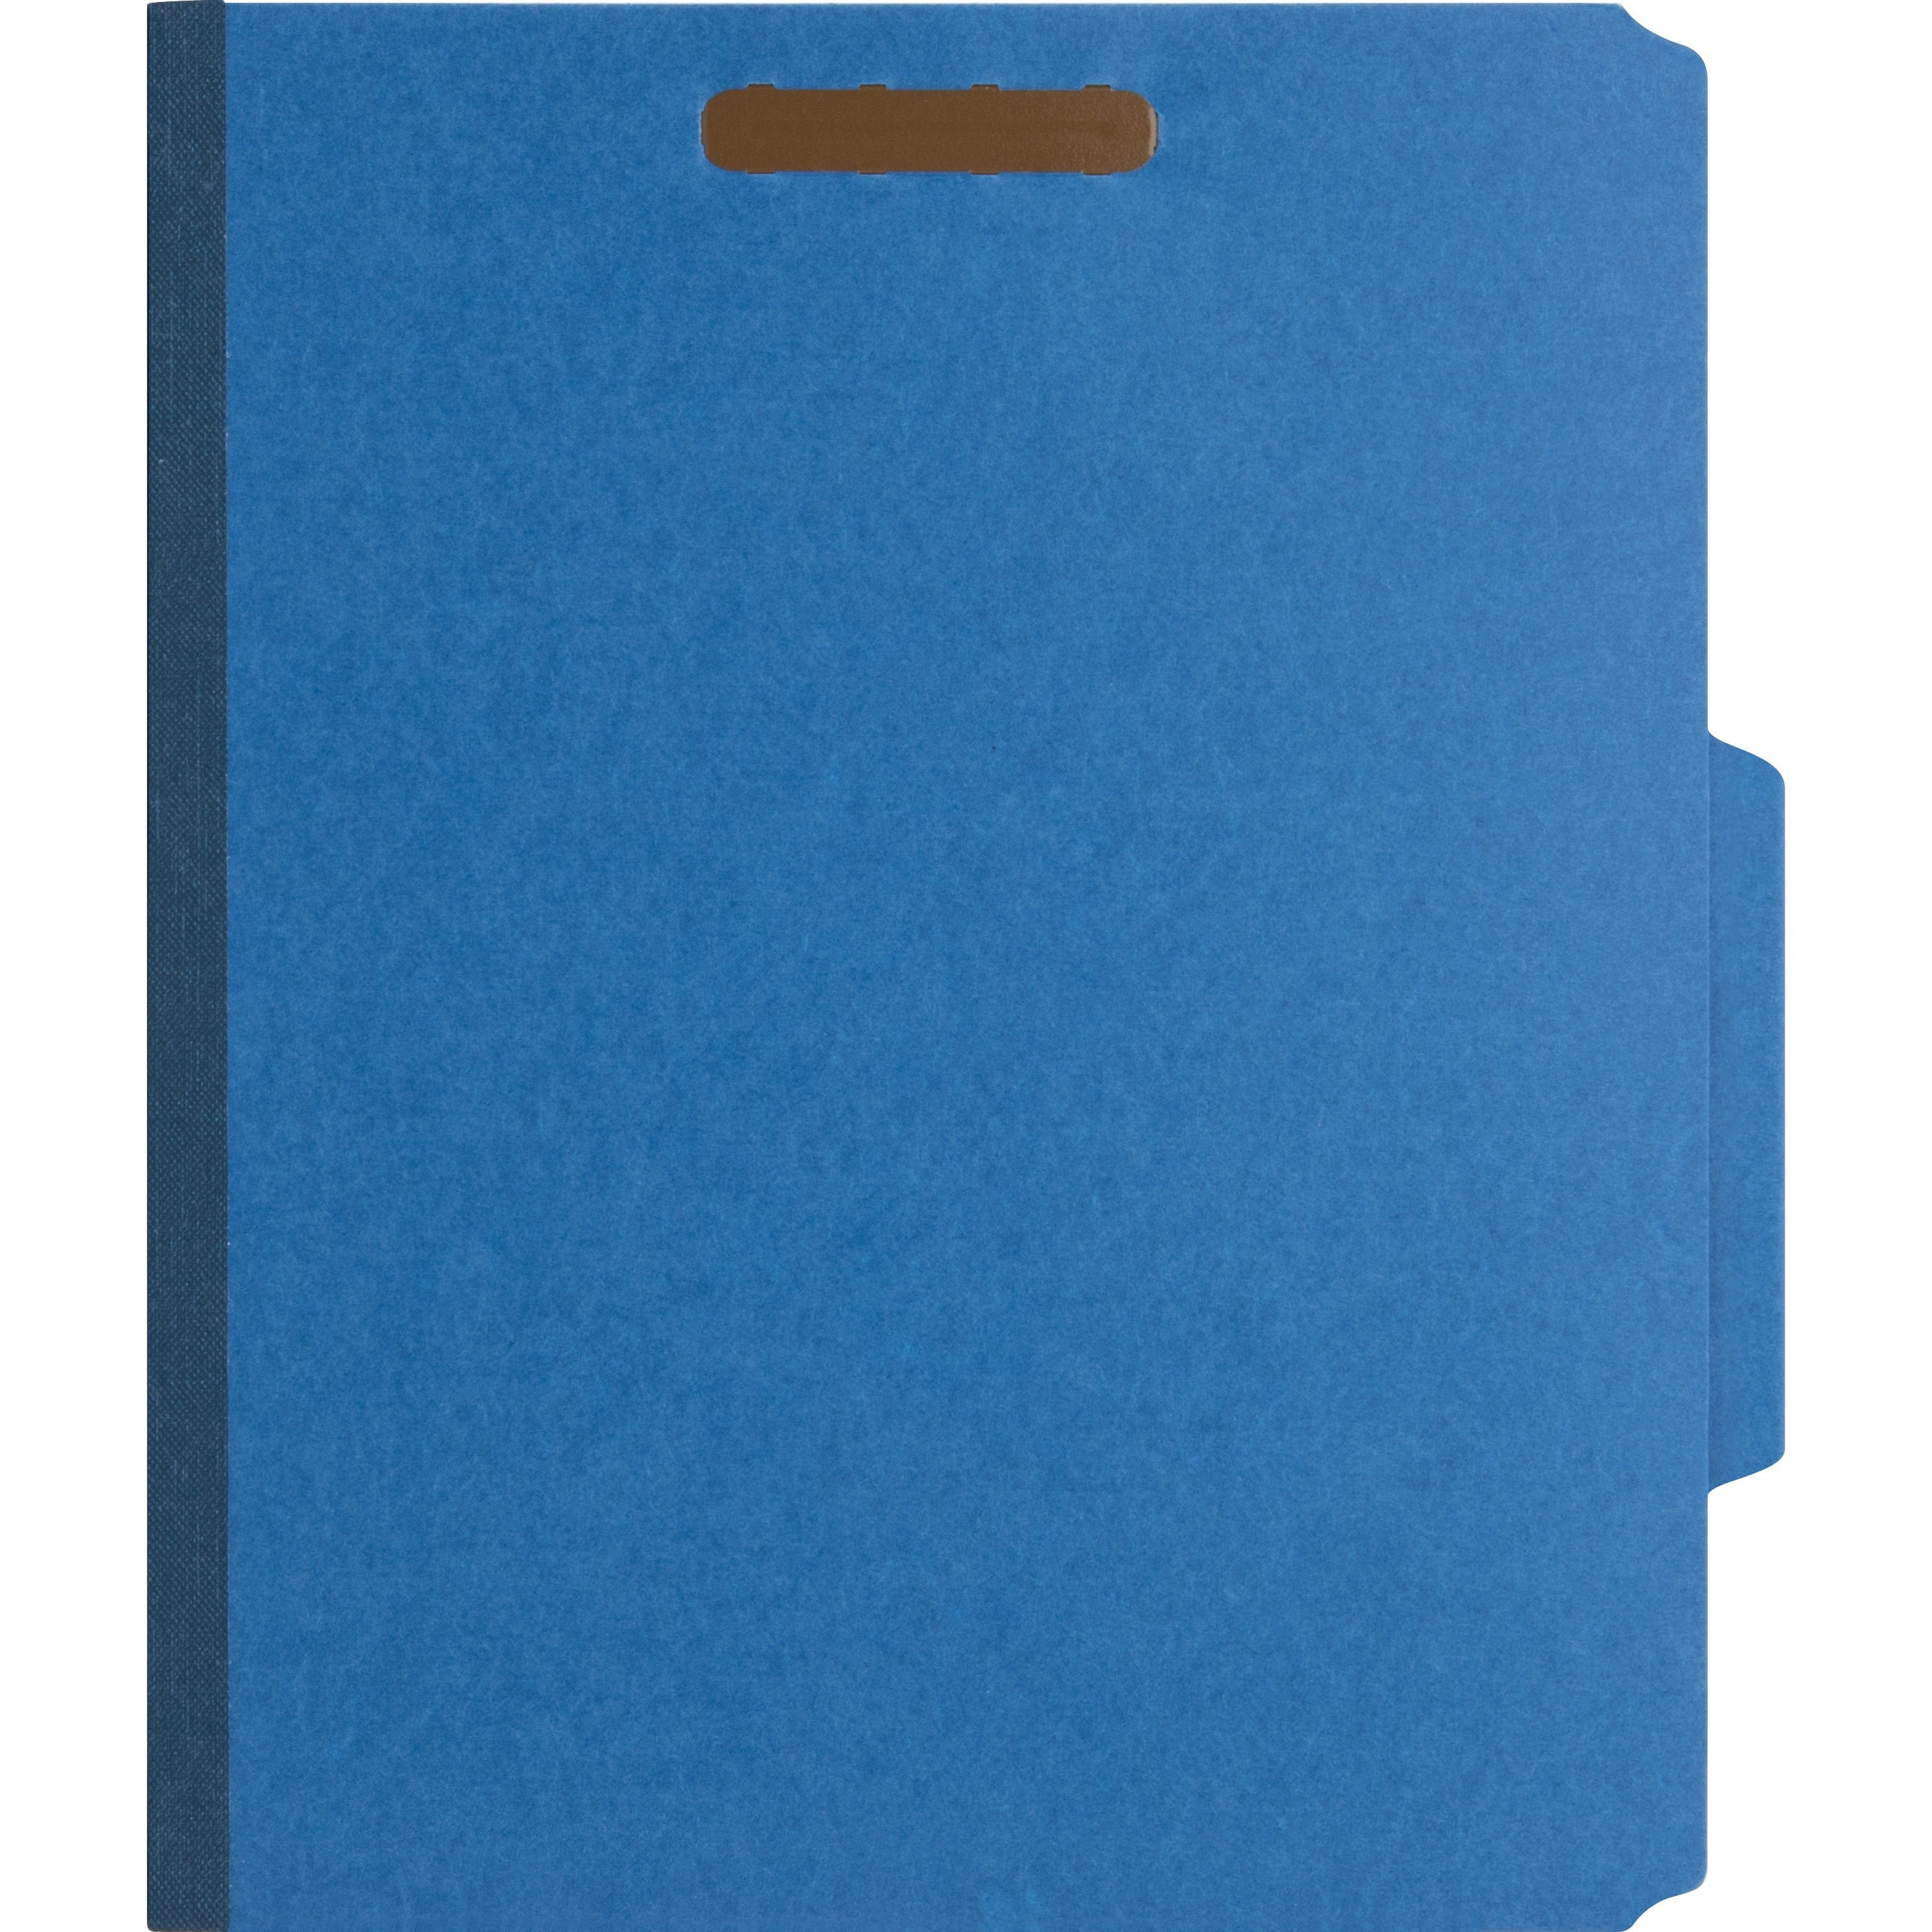 Nature Saver Letter Recycled Classification Folder - 8 1/2" x 11" - 2" Fastener Capacity for Folder - Top Tab Location - 1 Divider(s) - Blue - 100% Recycled - 10 / Box - 